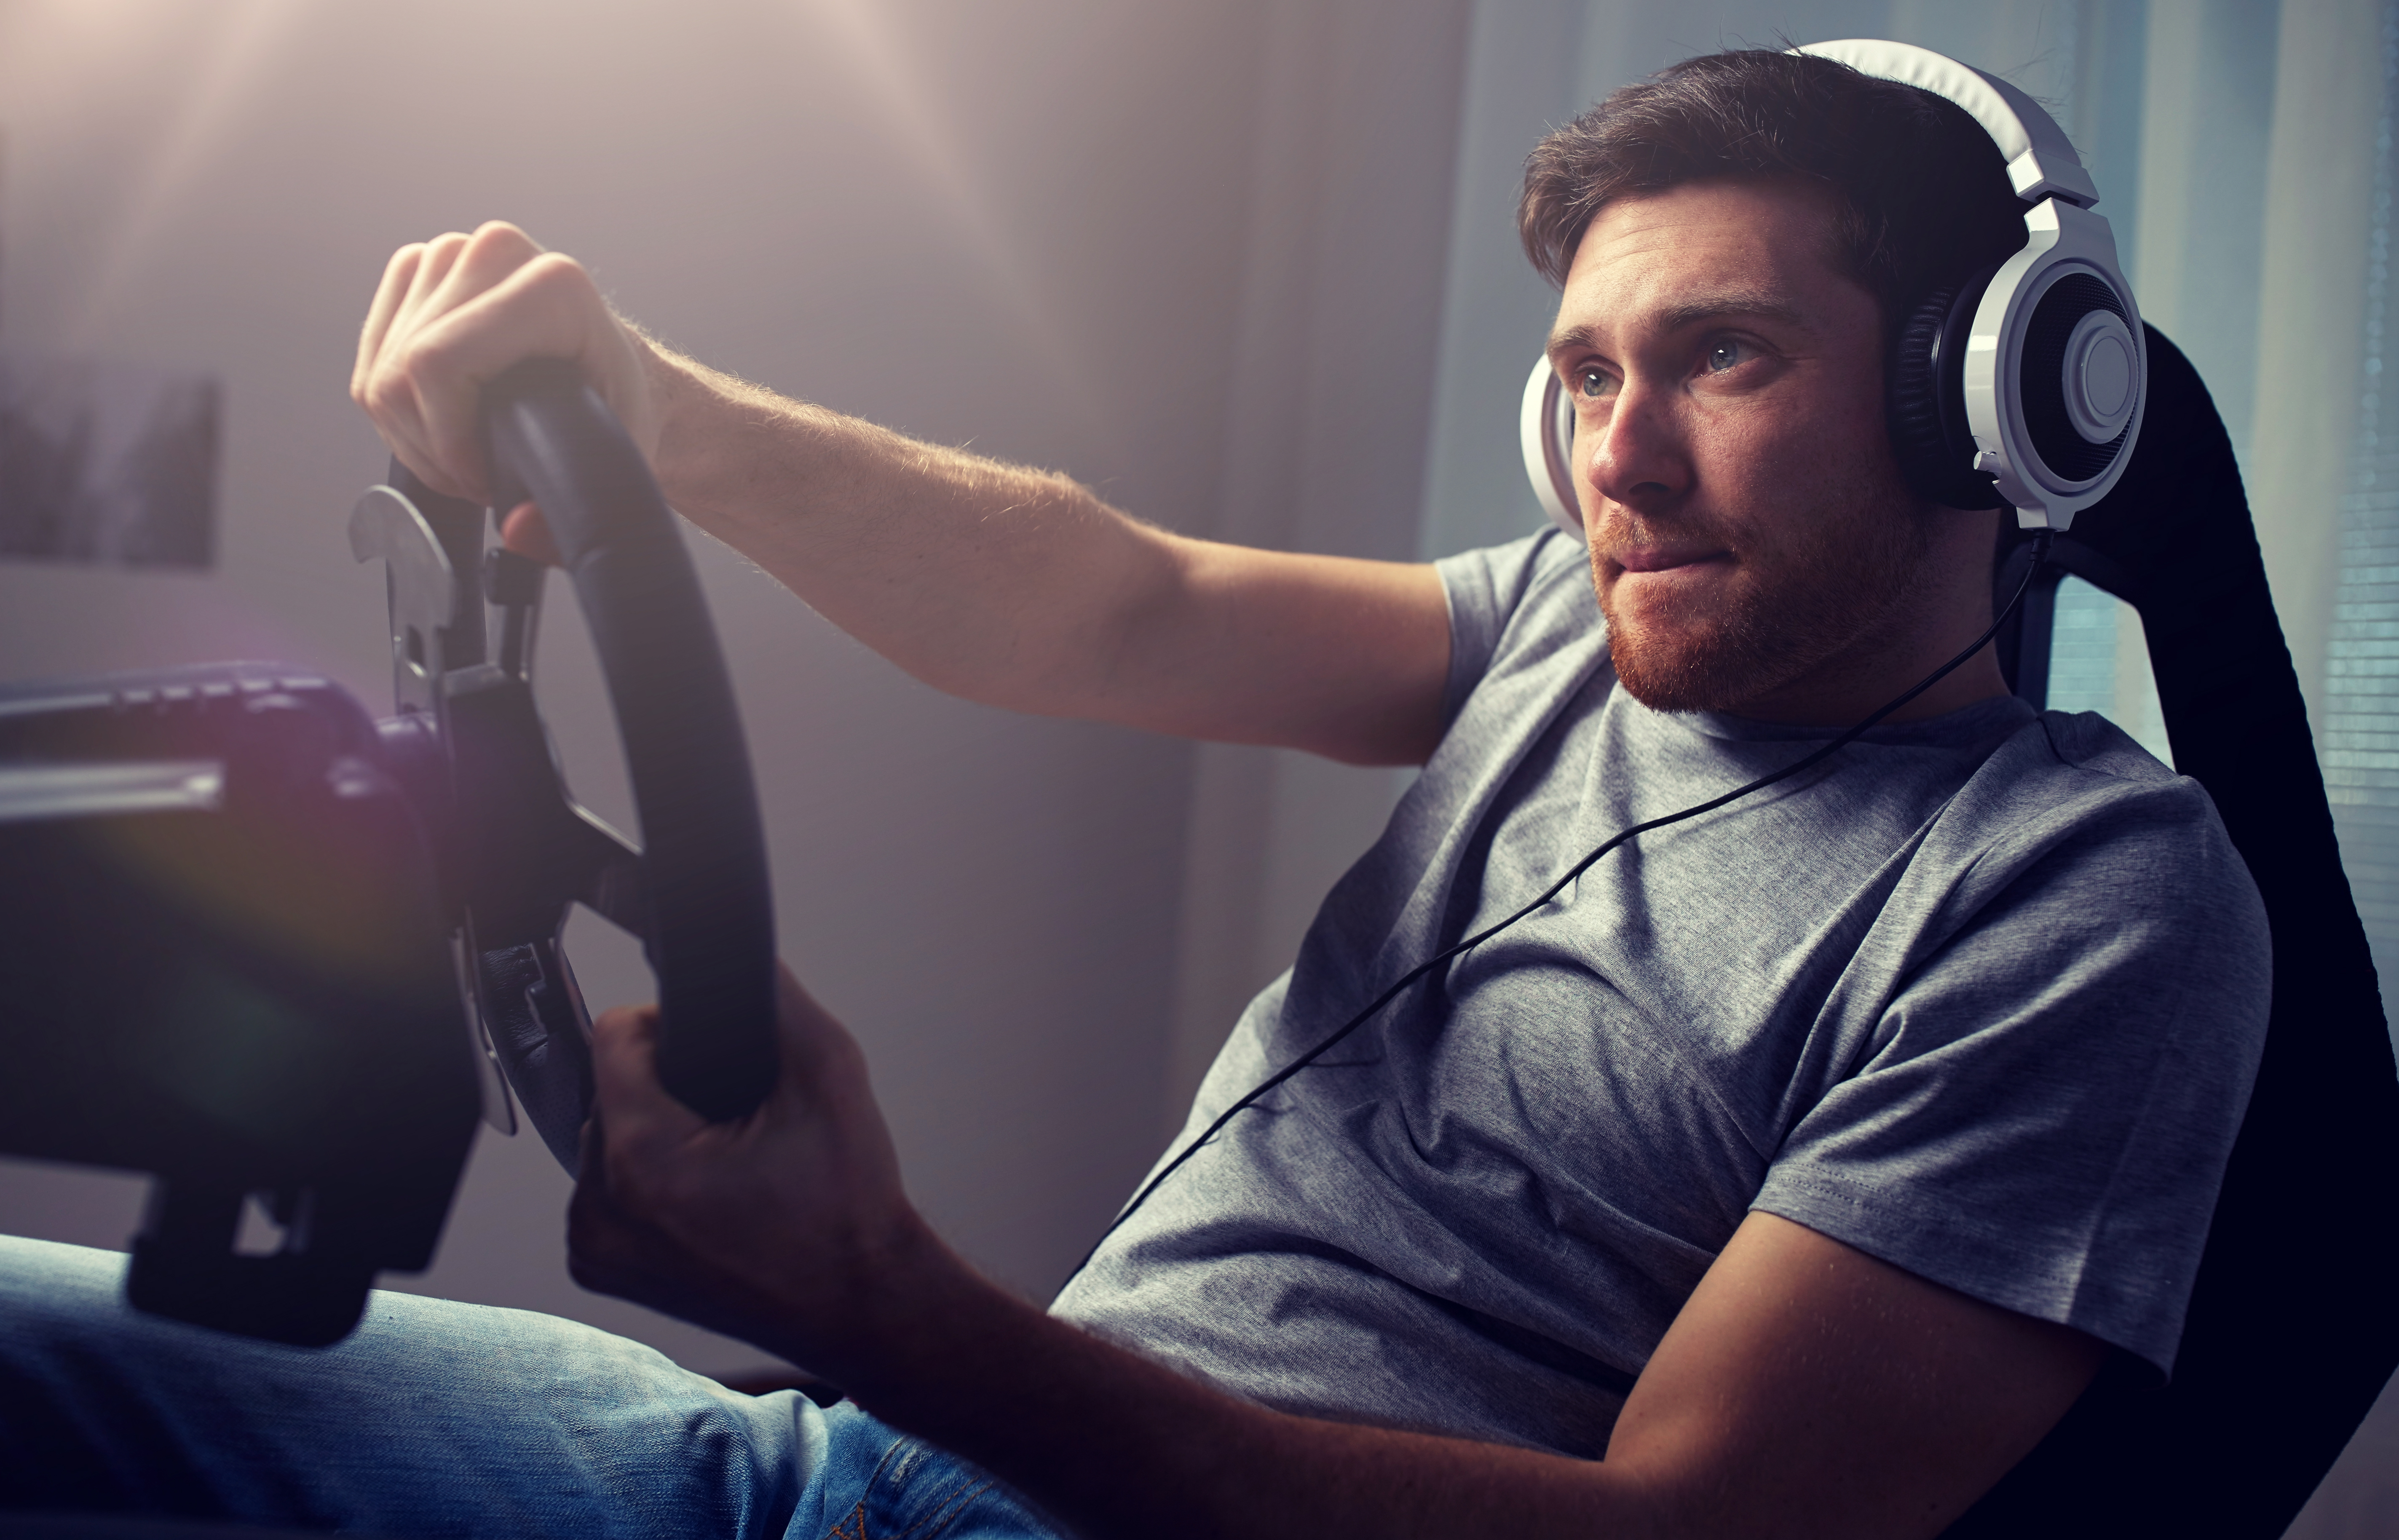 Man using a racing wheel while playing a video game